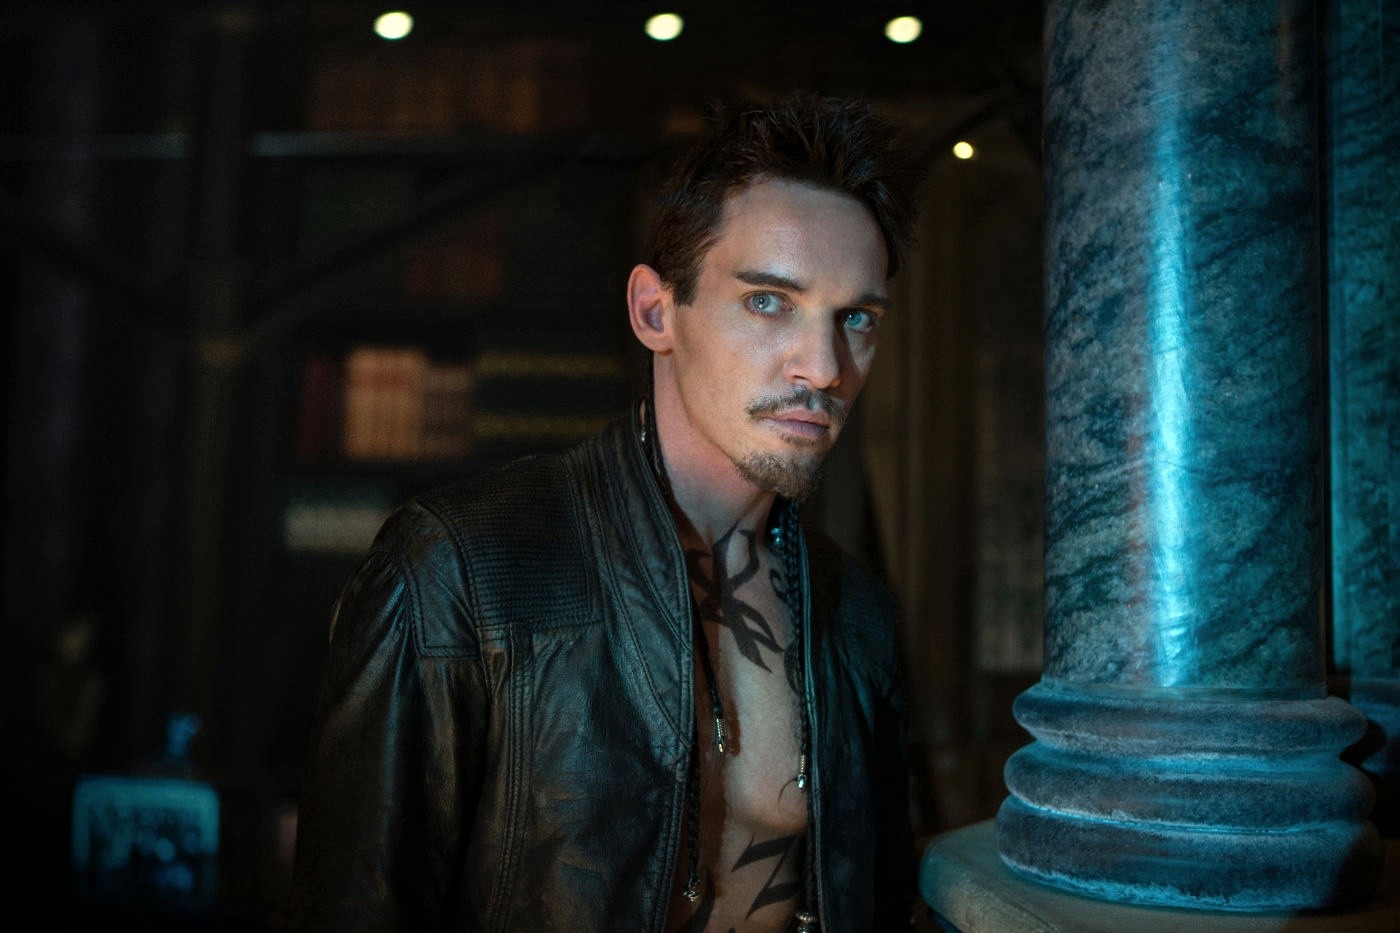 Jonathan Rhys-Meyers stars as Valentine Morgenstern in Screen Gems' The Mortal Instruments: City of Bones (2013). Photo credit by Rafy.